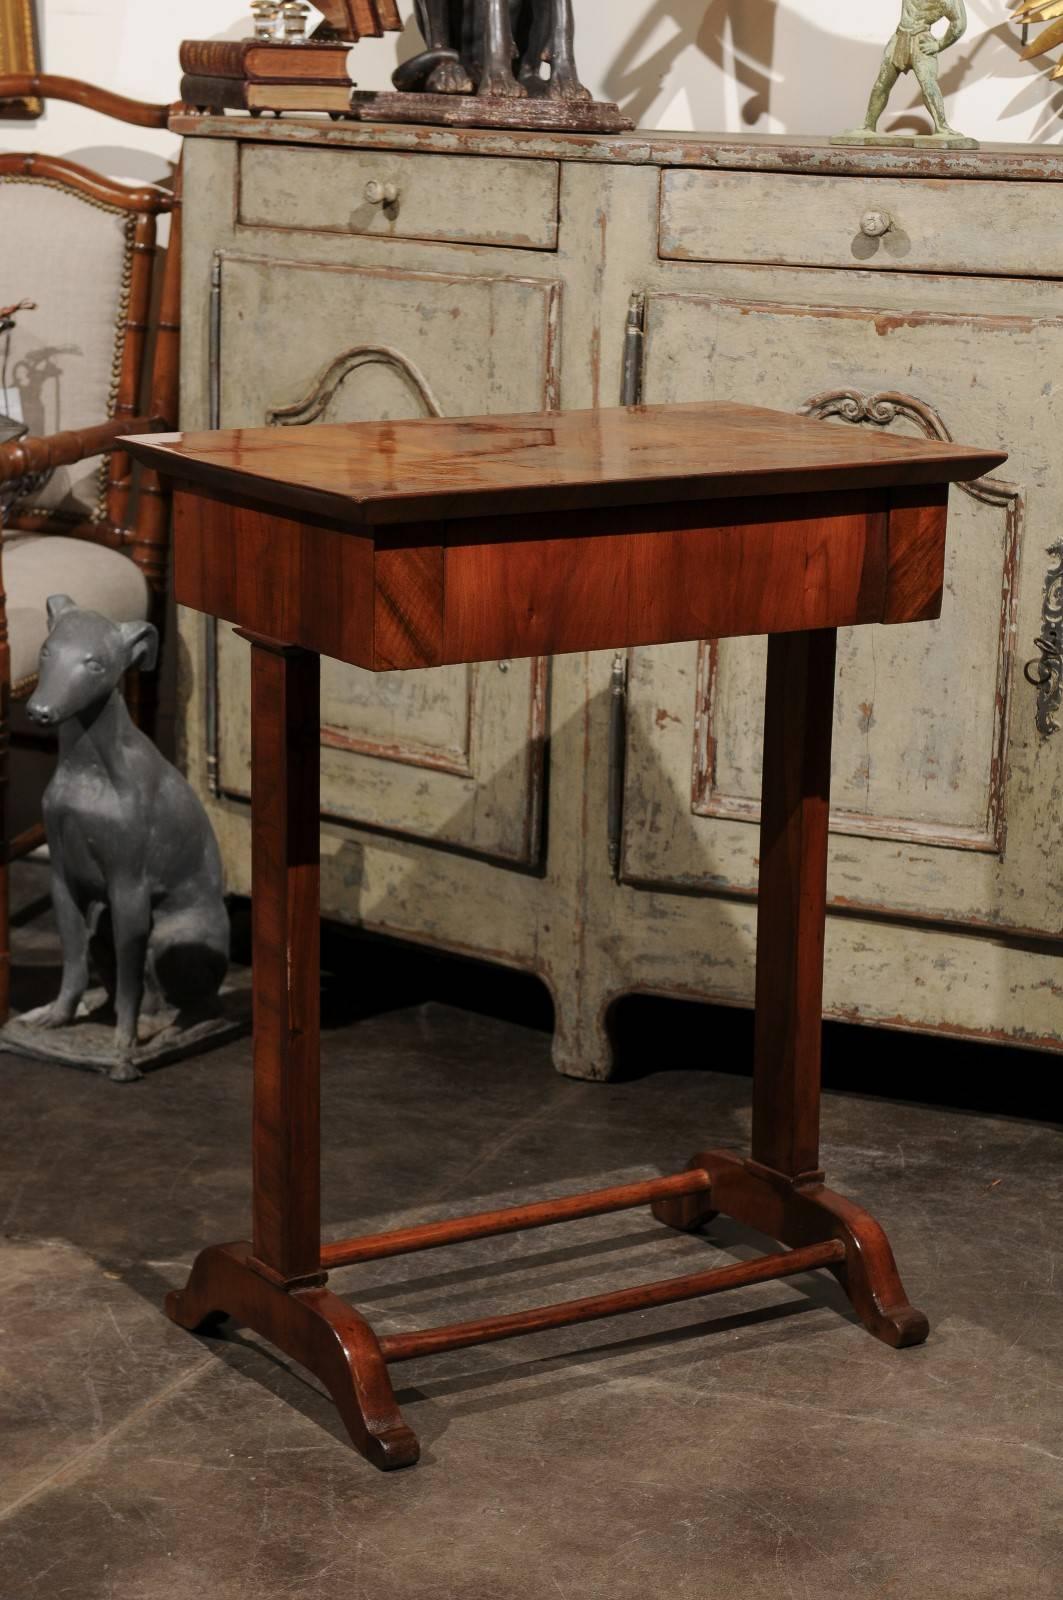 An Austrian Biedermeier walnut side table with frieze drawer and trestle base from the mid-19th century. This petite Biedermeier side table features a rectangular top sitting above a single dovetailed frieze drawer, hidden in the table's apron. The